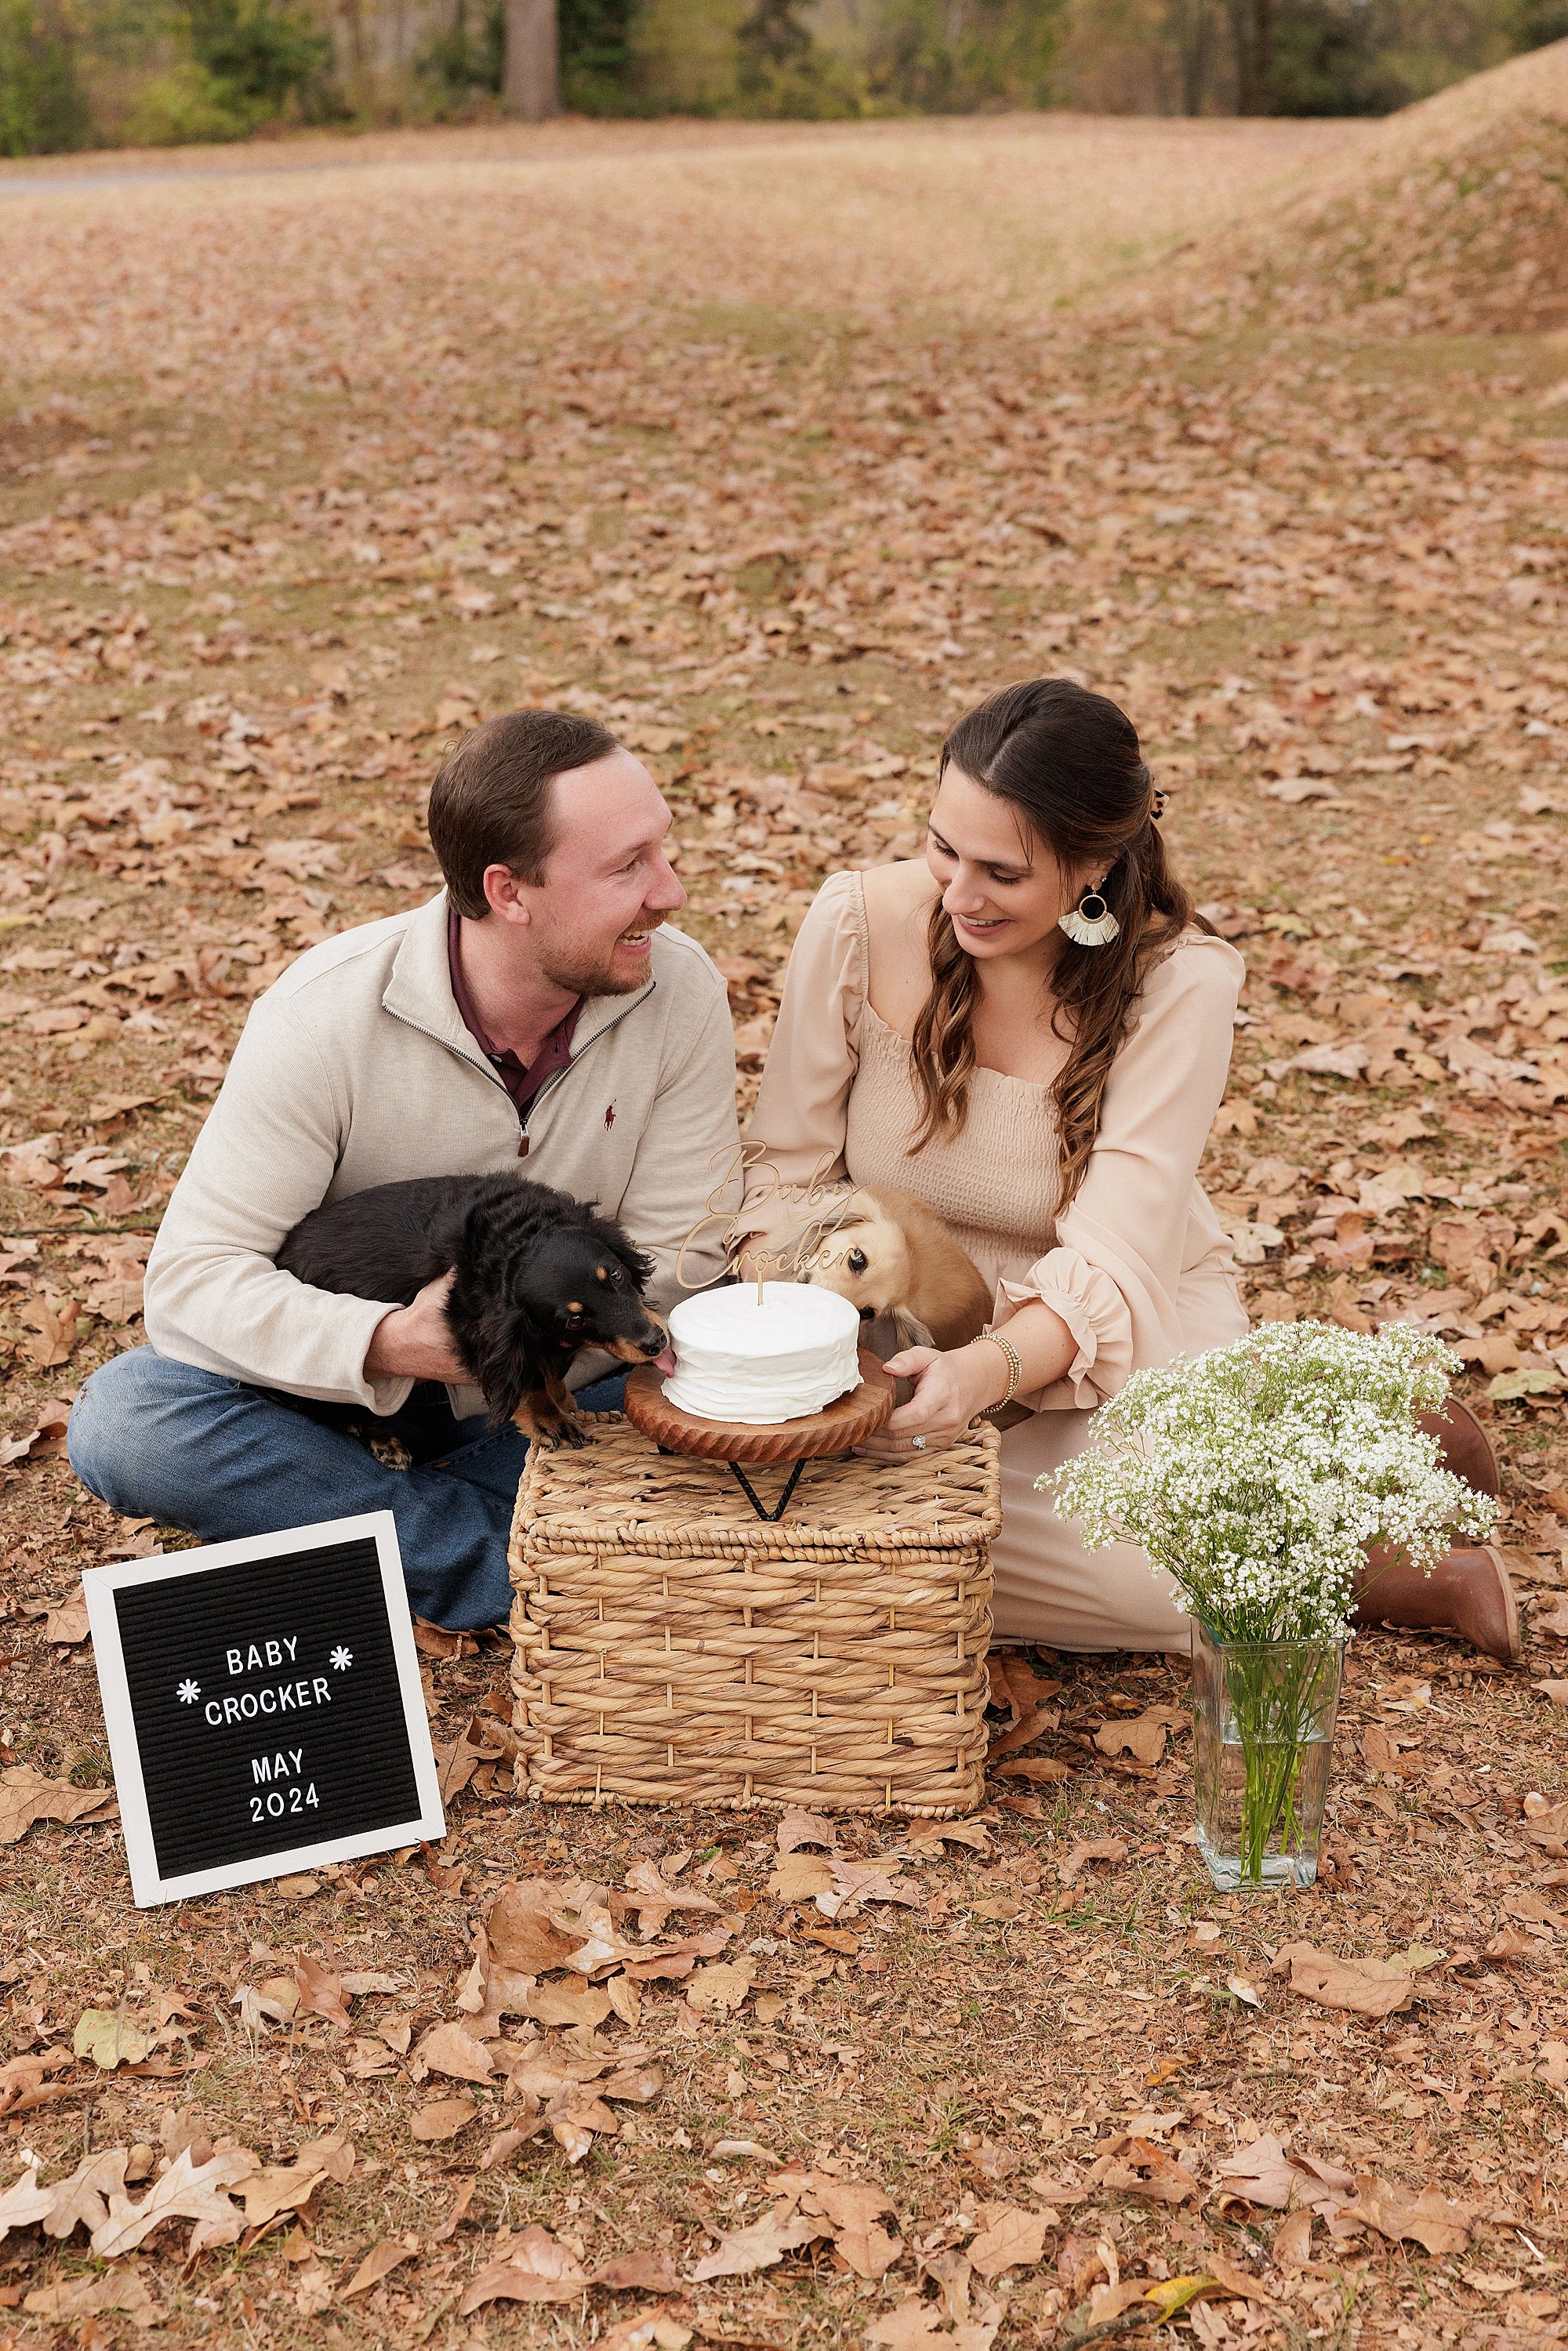 intown-atlanta-morningside-decatur-brookhaven-buckhead-outdoor-couples-maternity-fall-photoshoot-daschunds-doxies-gender-reveal_6180.jpg